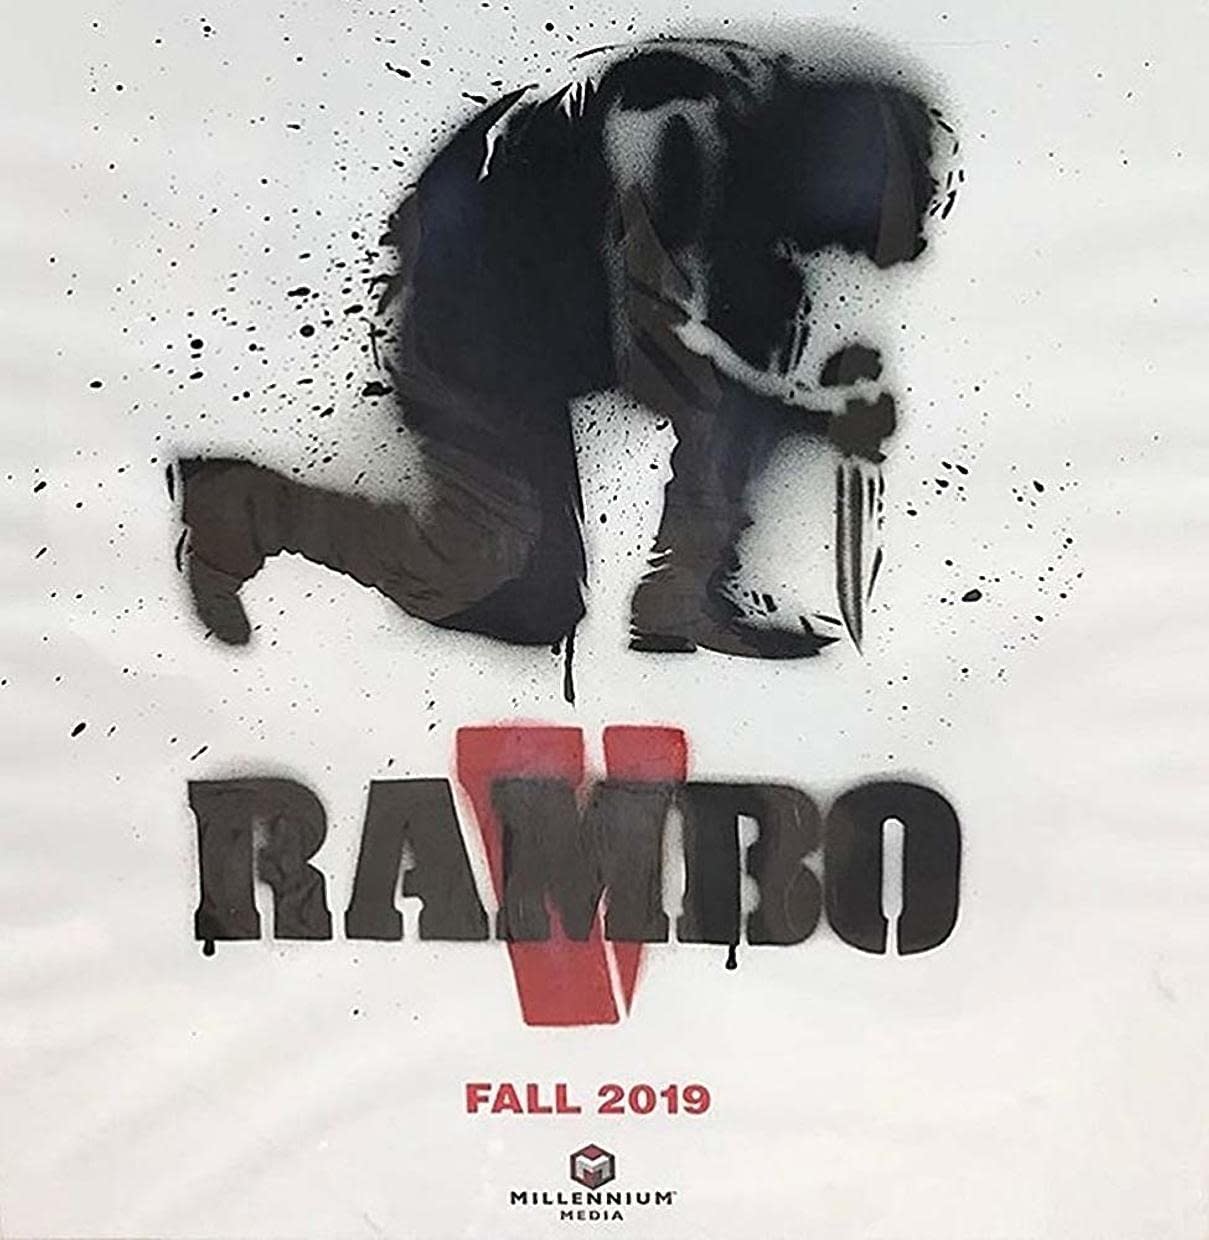 Rambo 5: Last Blood Snags a September 2019 Release Date